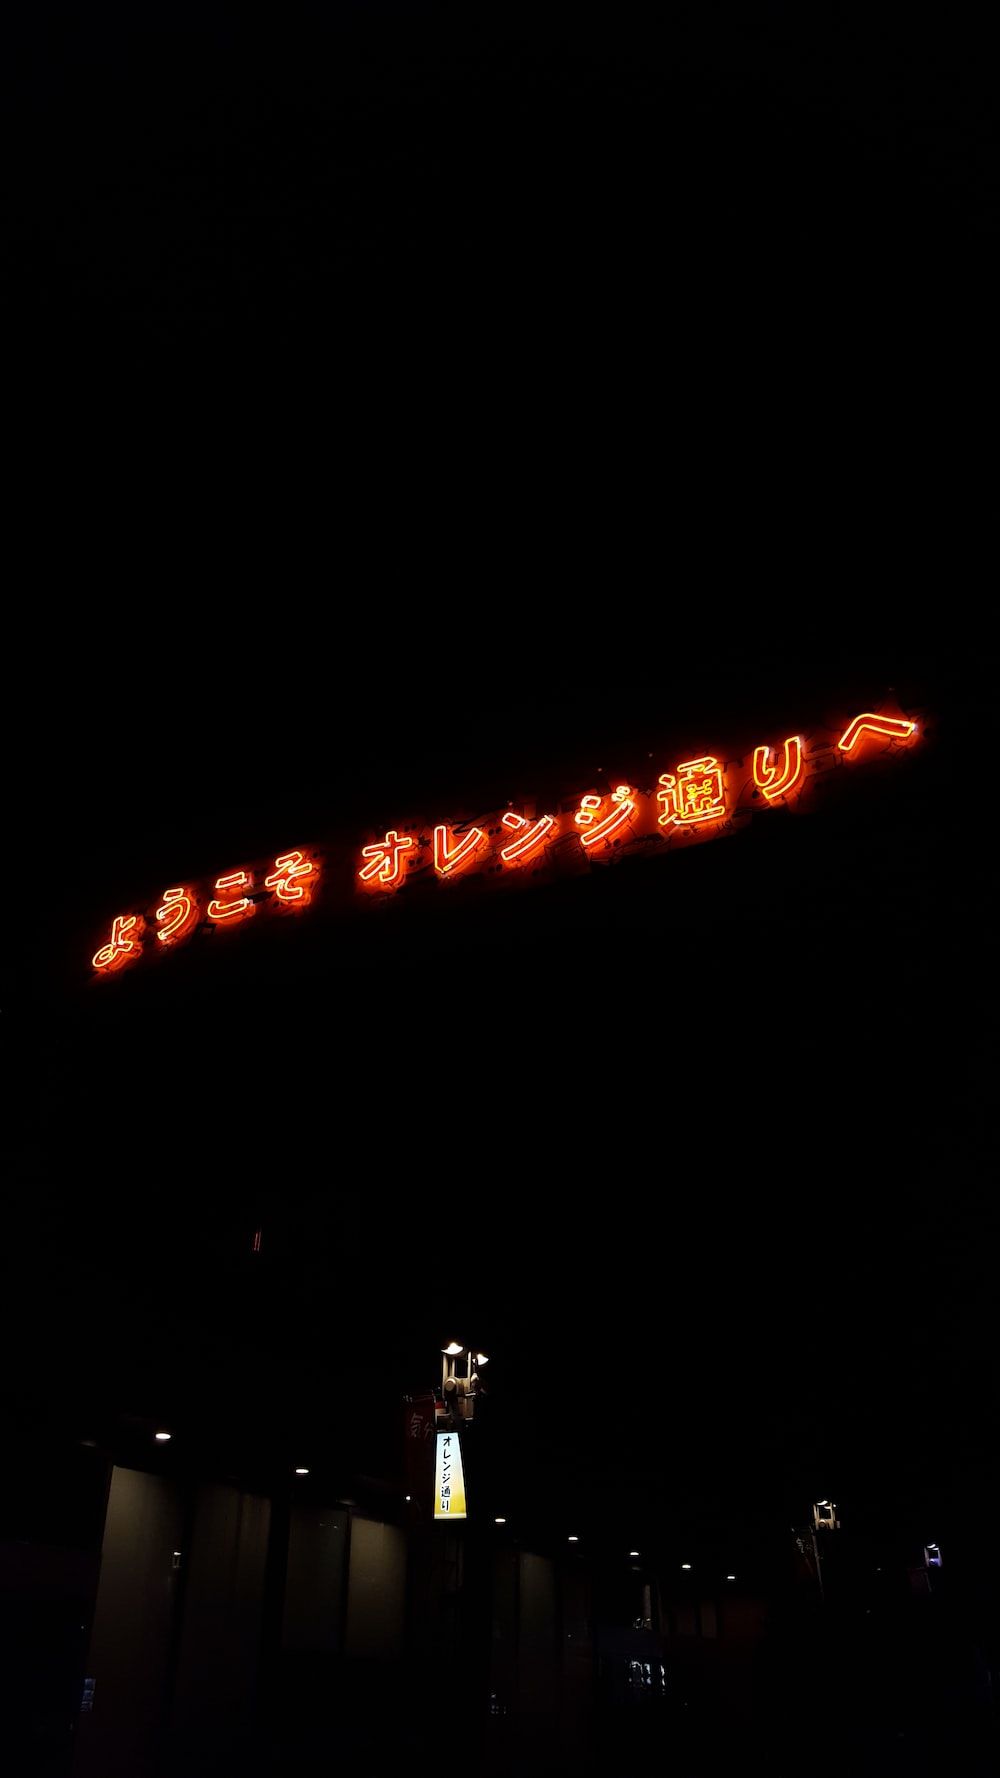 A sign that is lit up at night - Neon orange